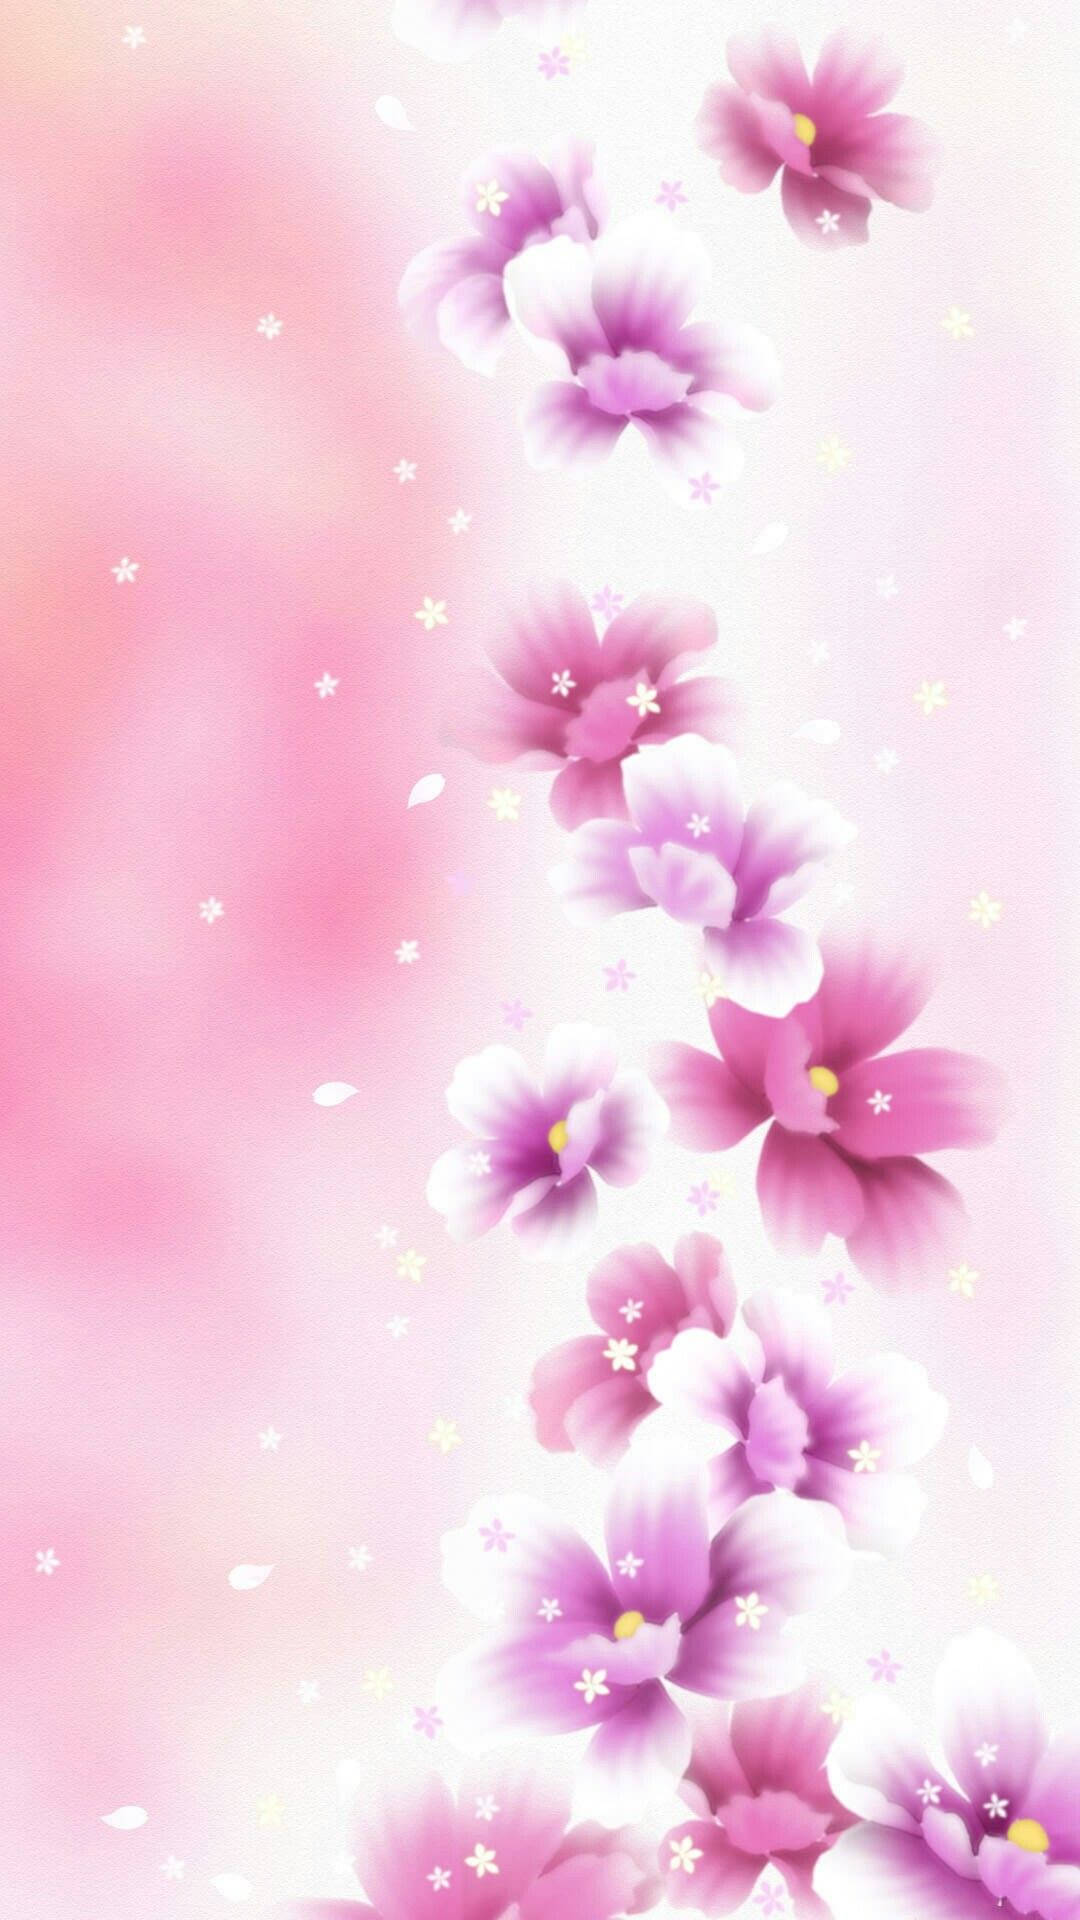 Enchanting Beauty In Purple - Cute Floral Bliss Background